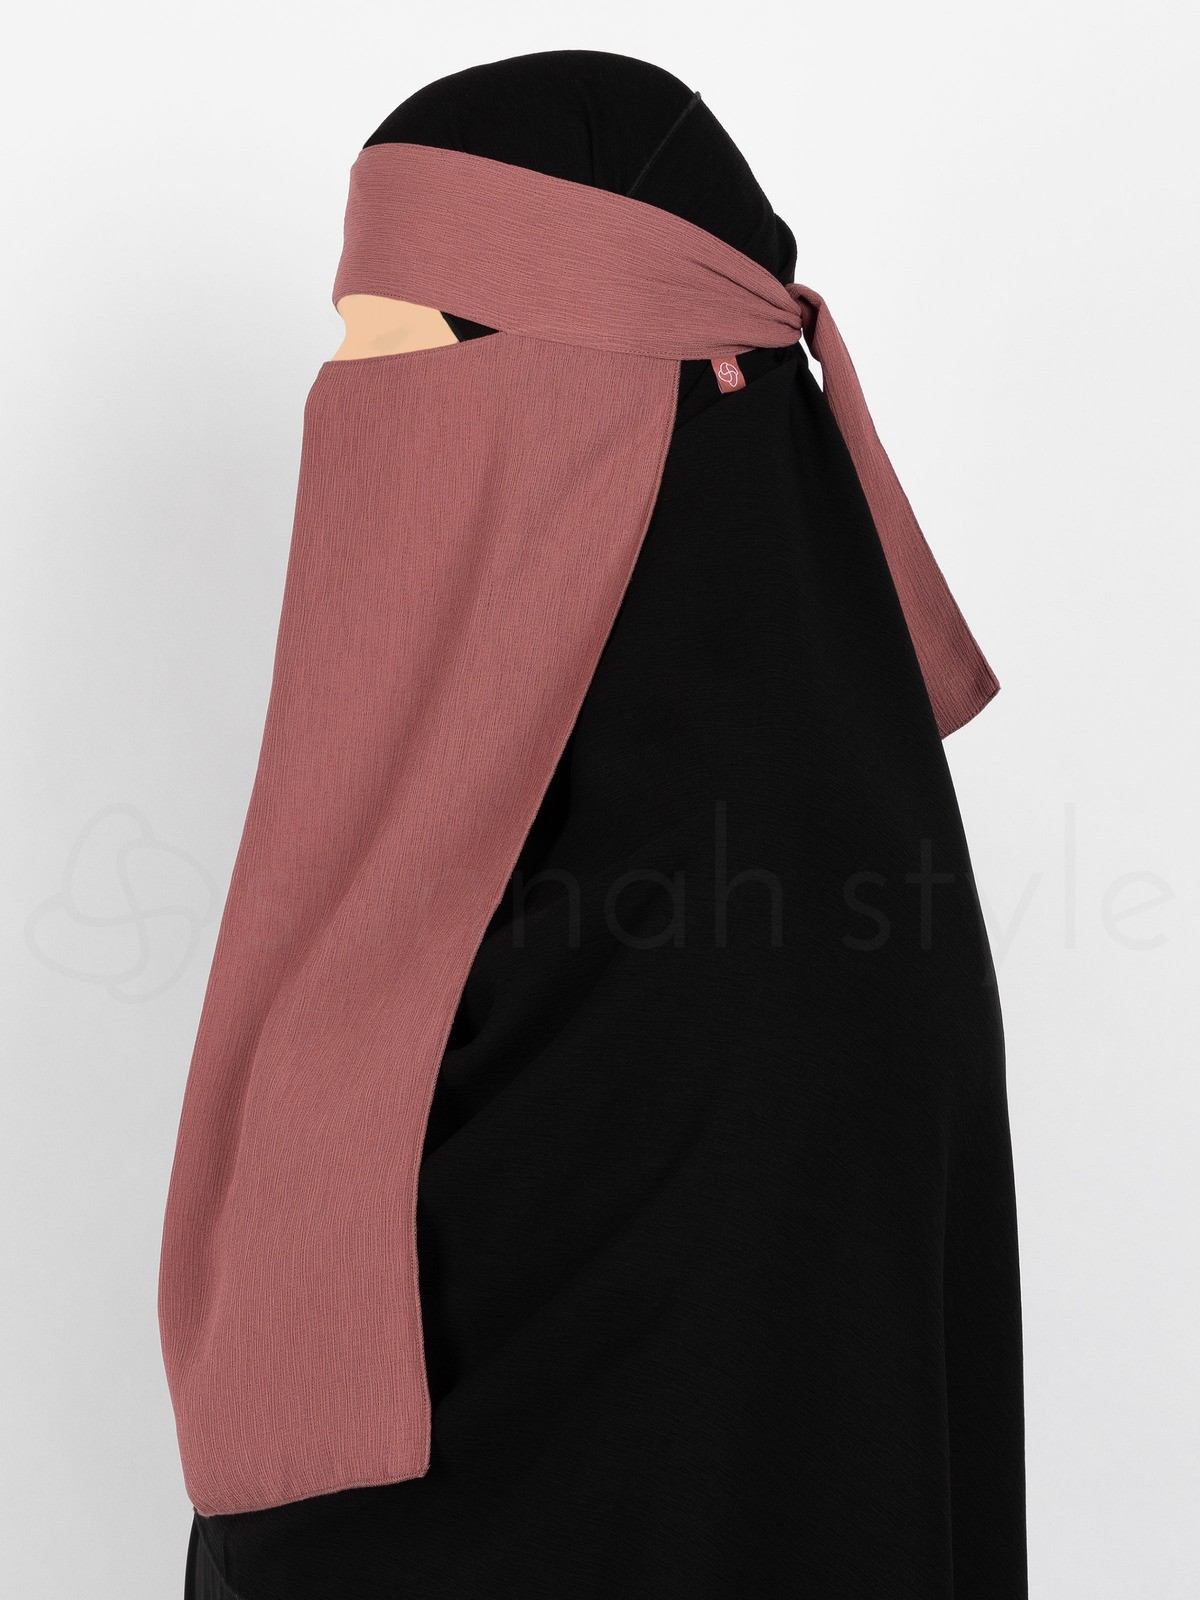 Sunnah Style - Brushed One Layer Niqab (Canyon Rose)